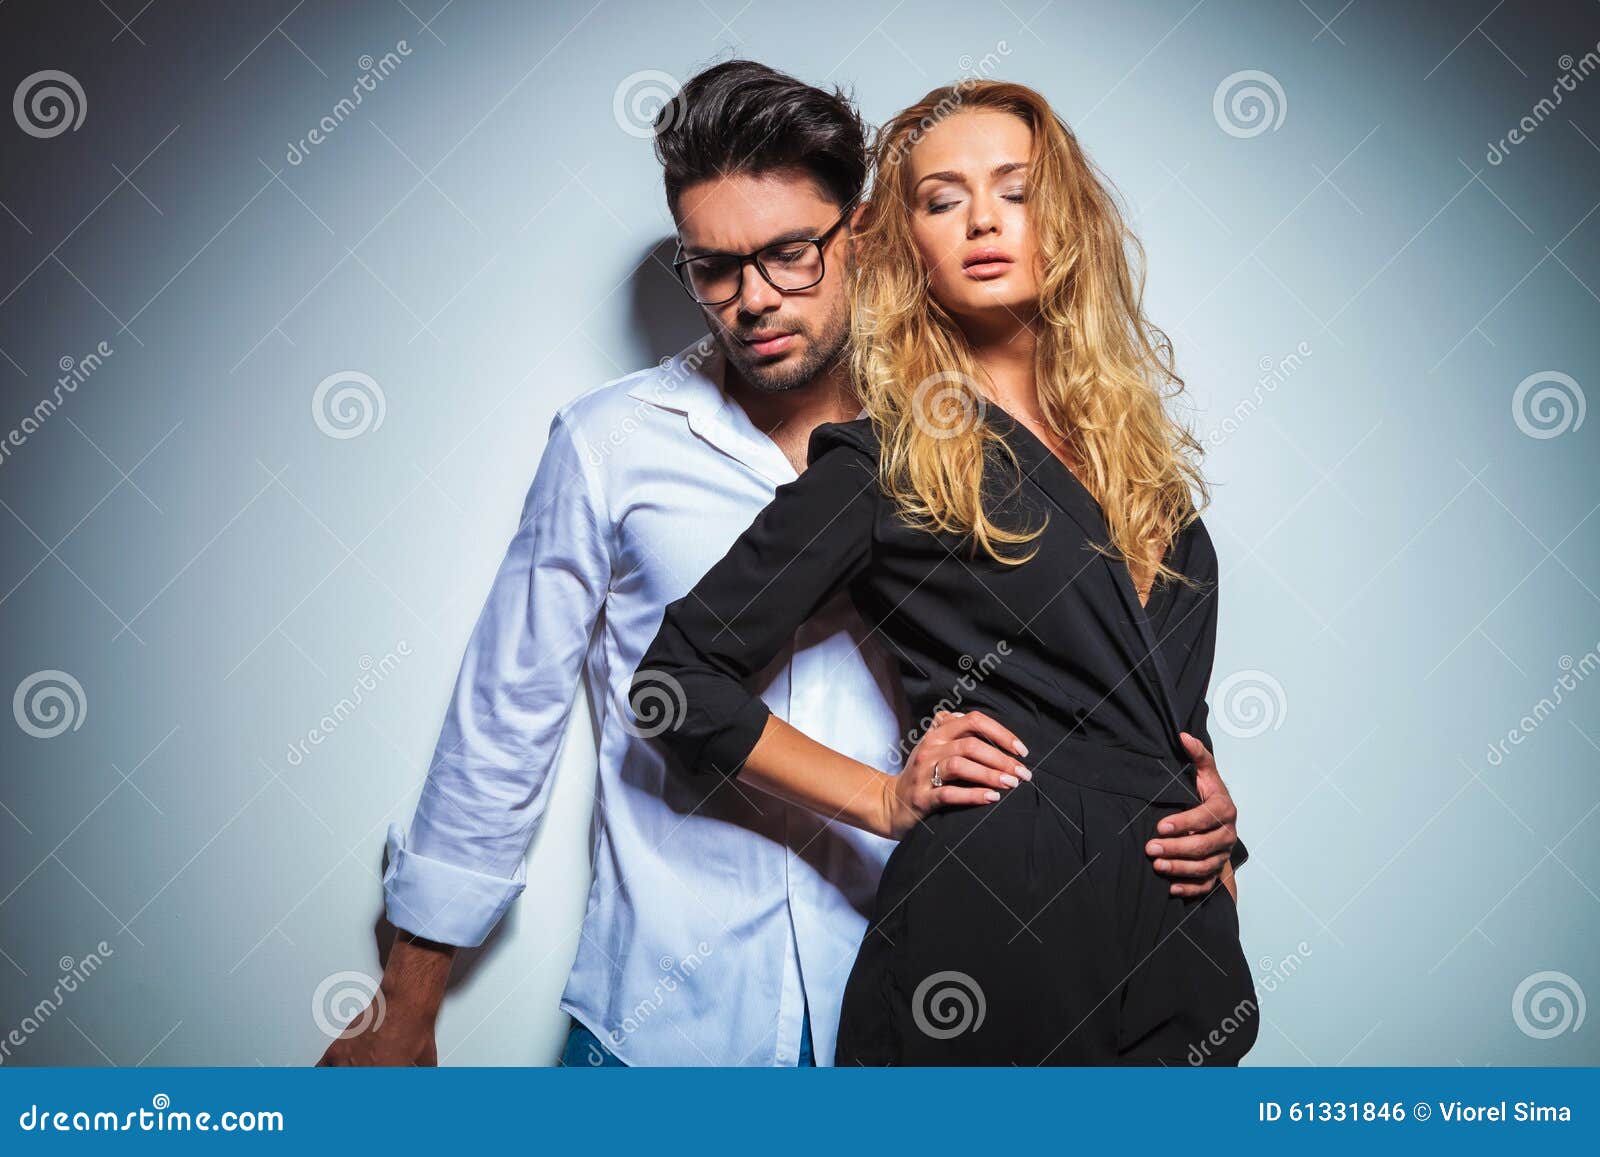 398,634 Couple Pose Royalty-Free Photos and Stock Images | Shutterstock